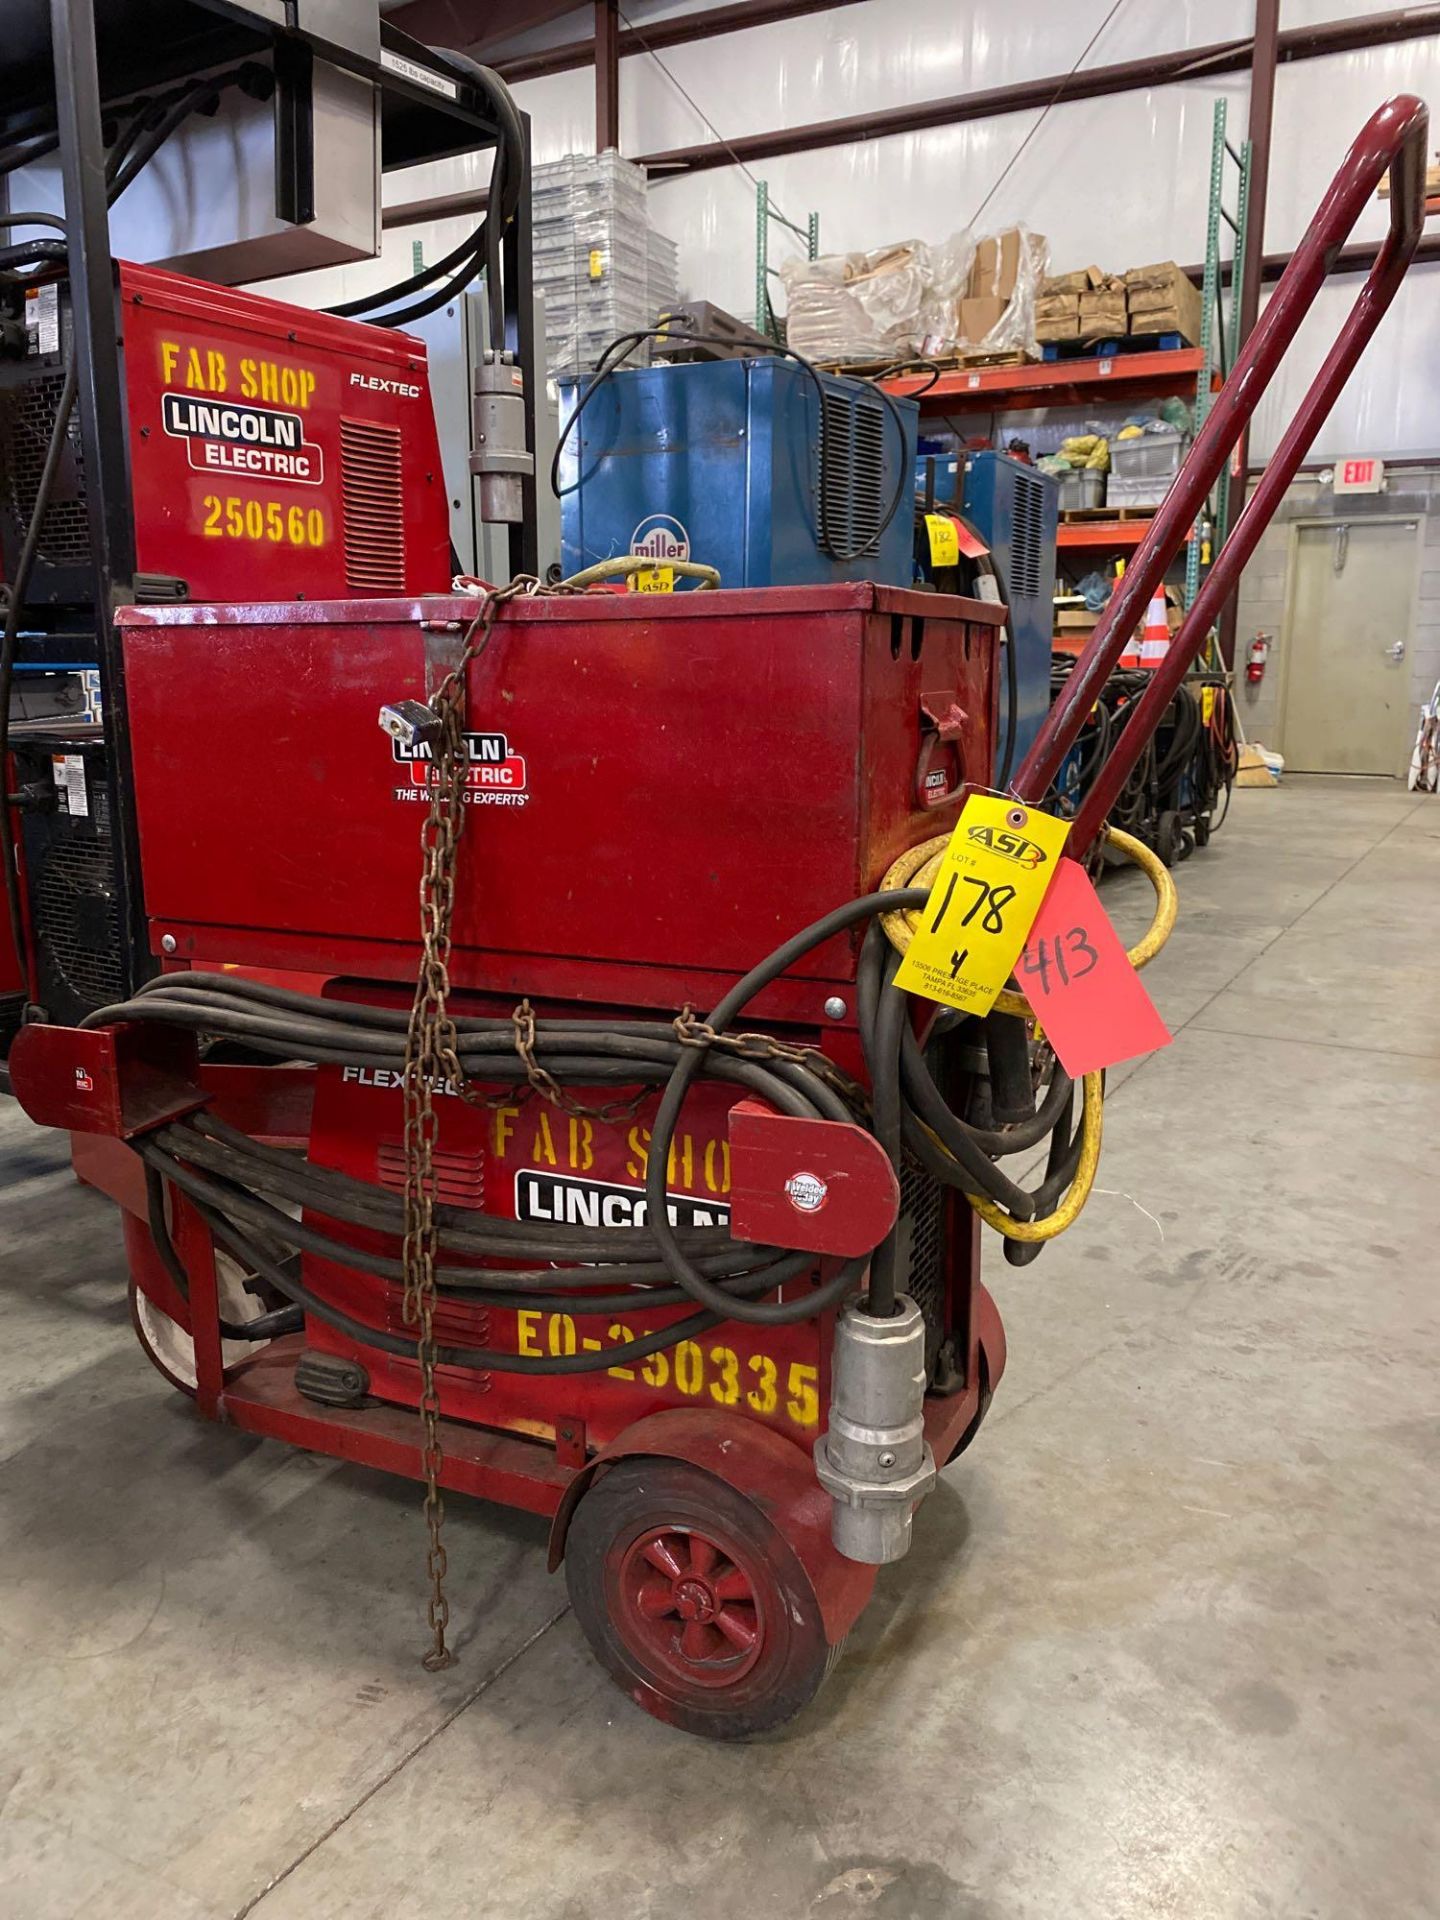 LINCOLN ELECTRIC FLEXTEC 450 WELDER WITH CART AND STORAGE BOX - Image 2 of 5